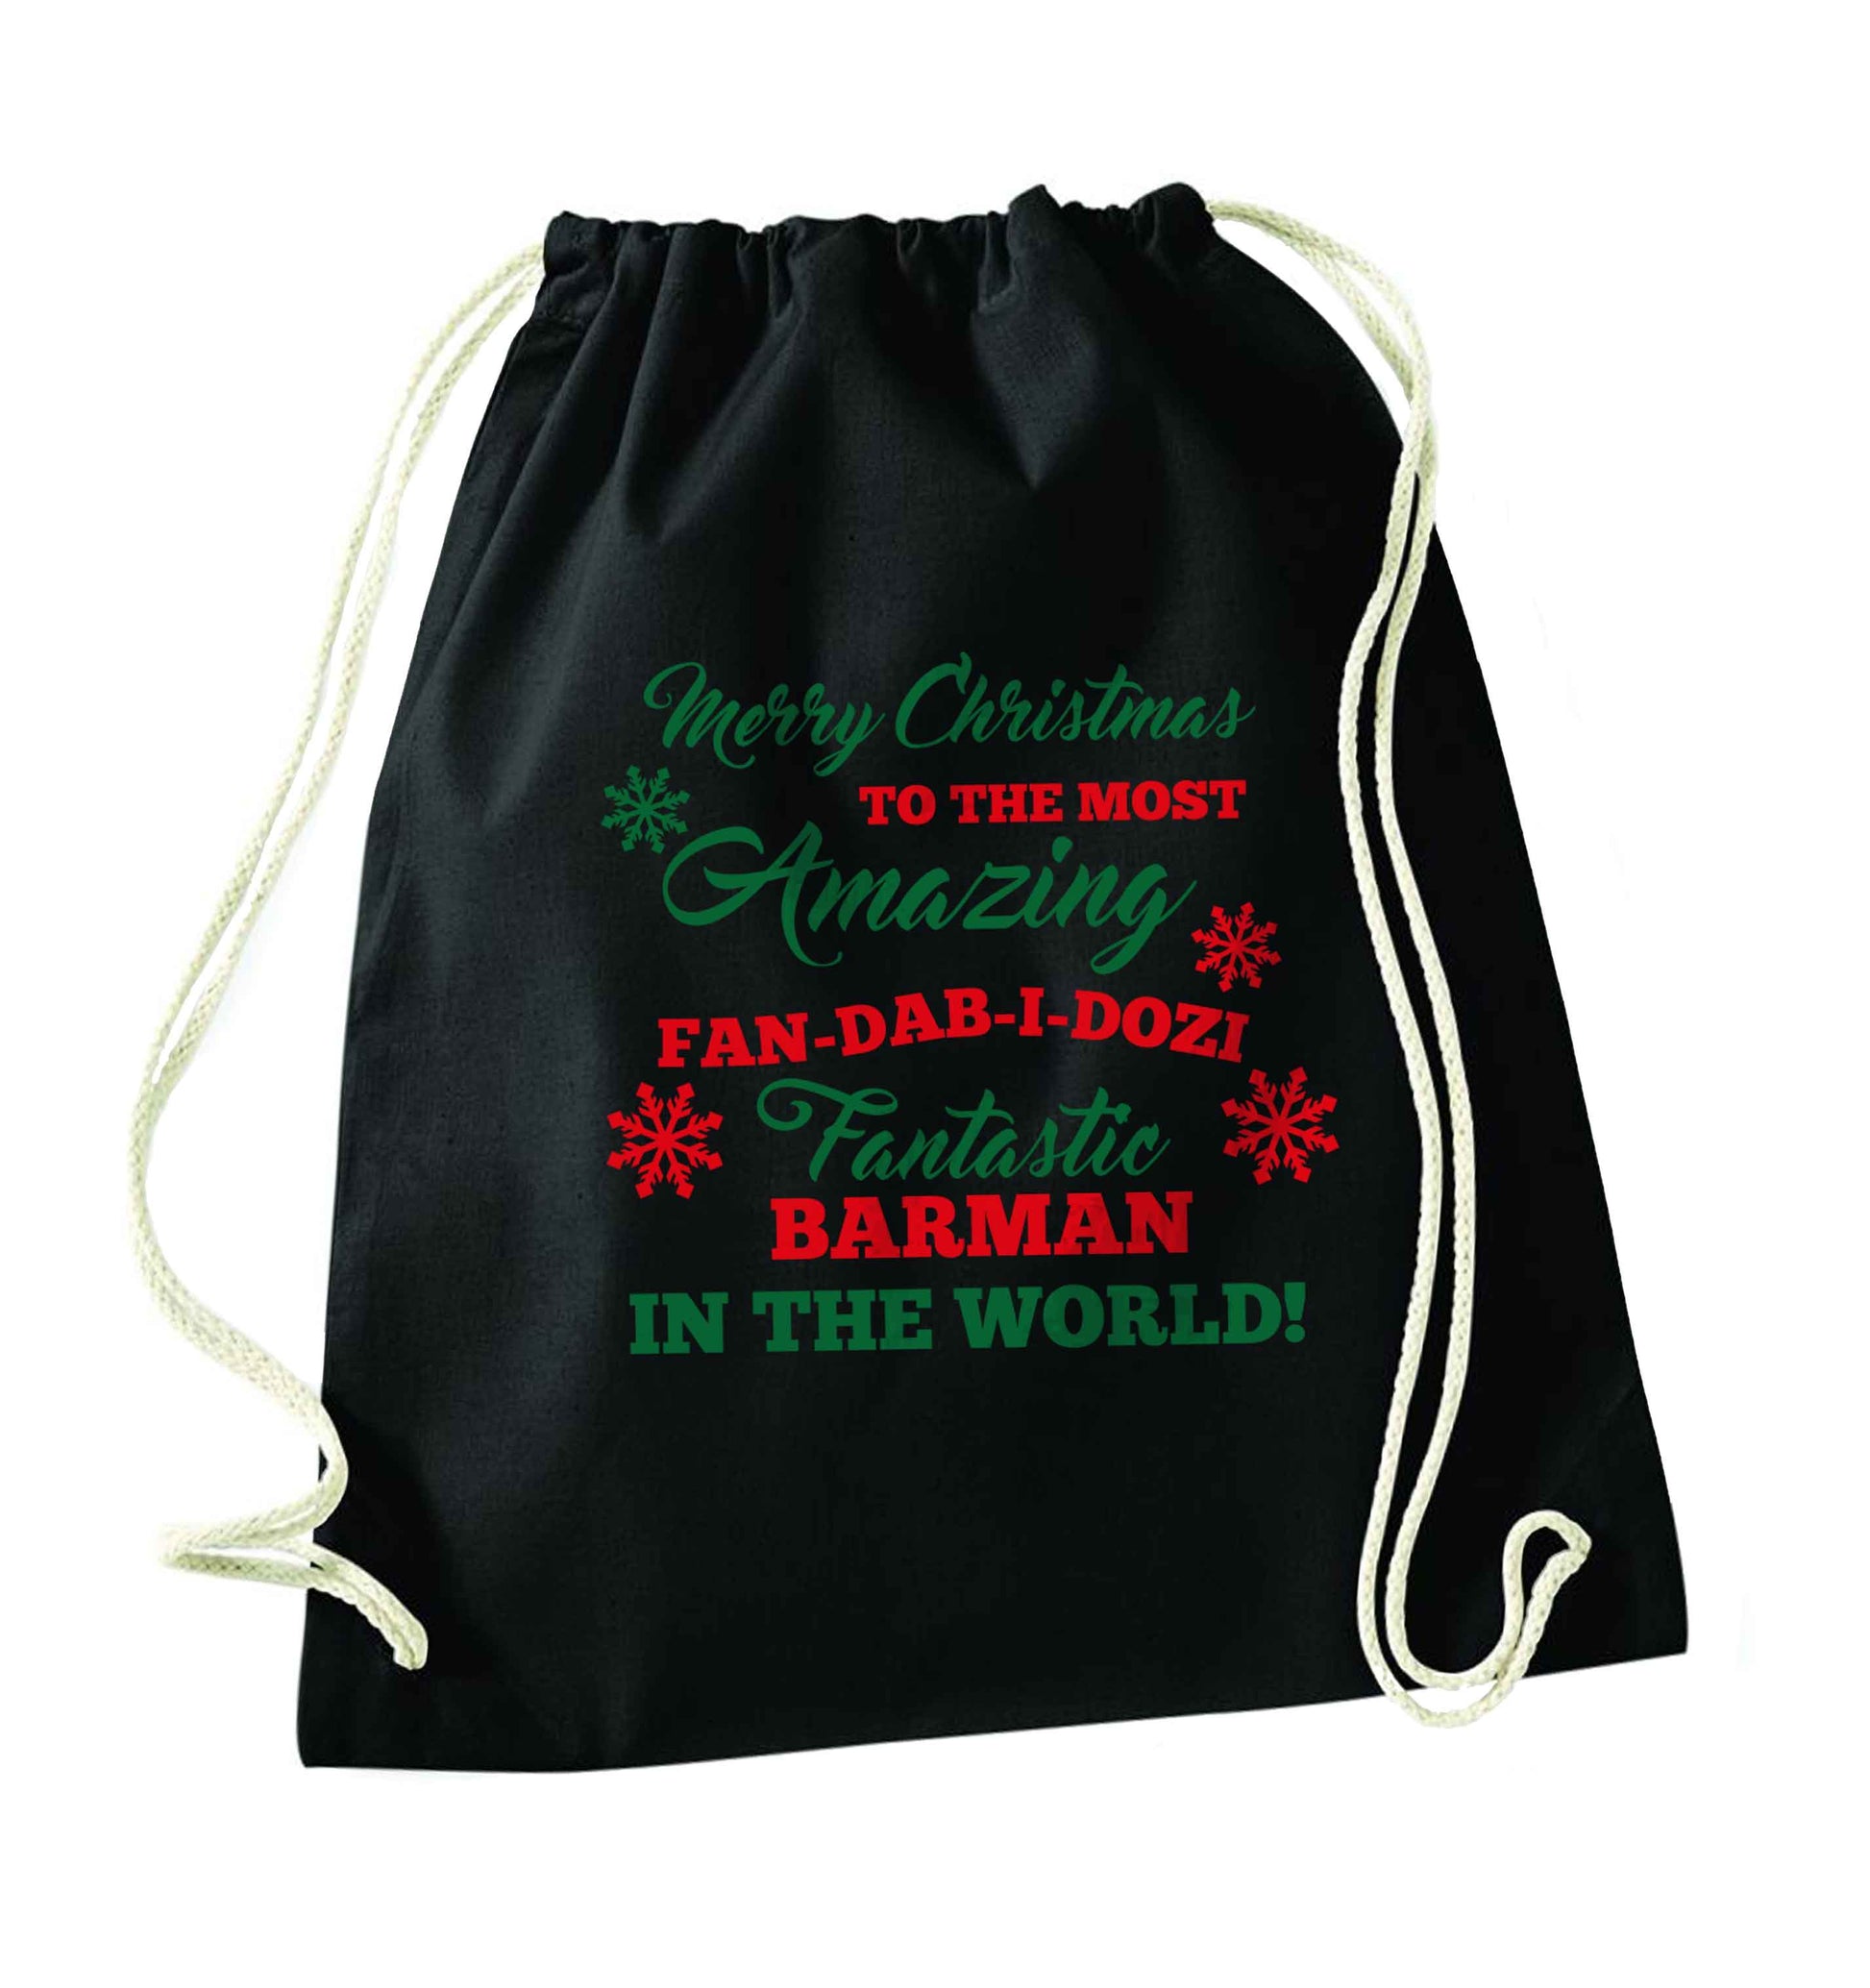 Merry Christmas to the most amazing barman in the world! black drawstring bag